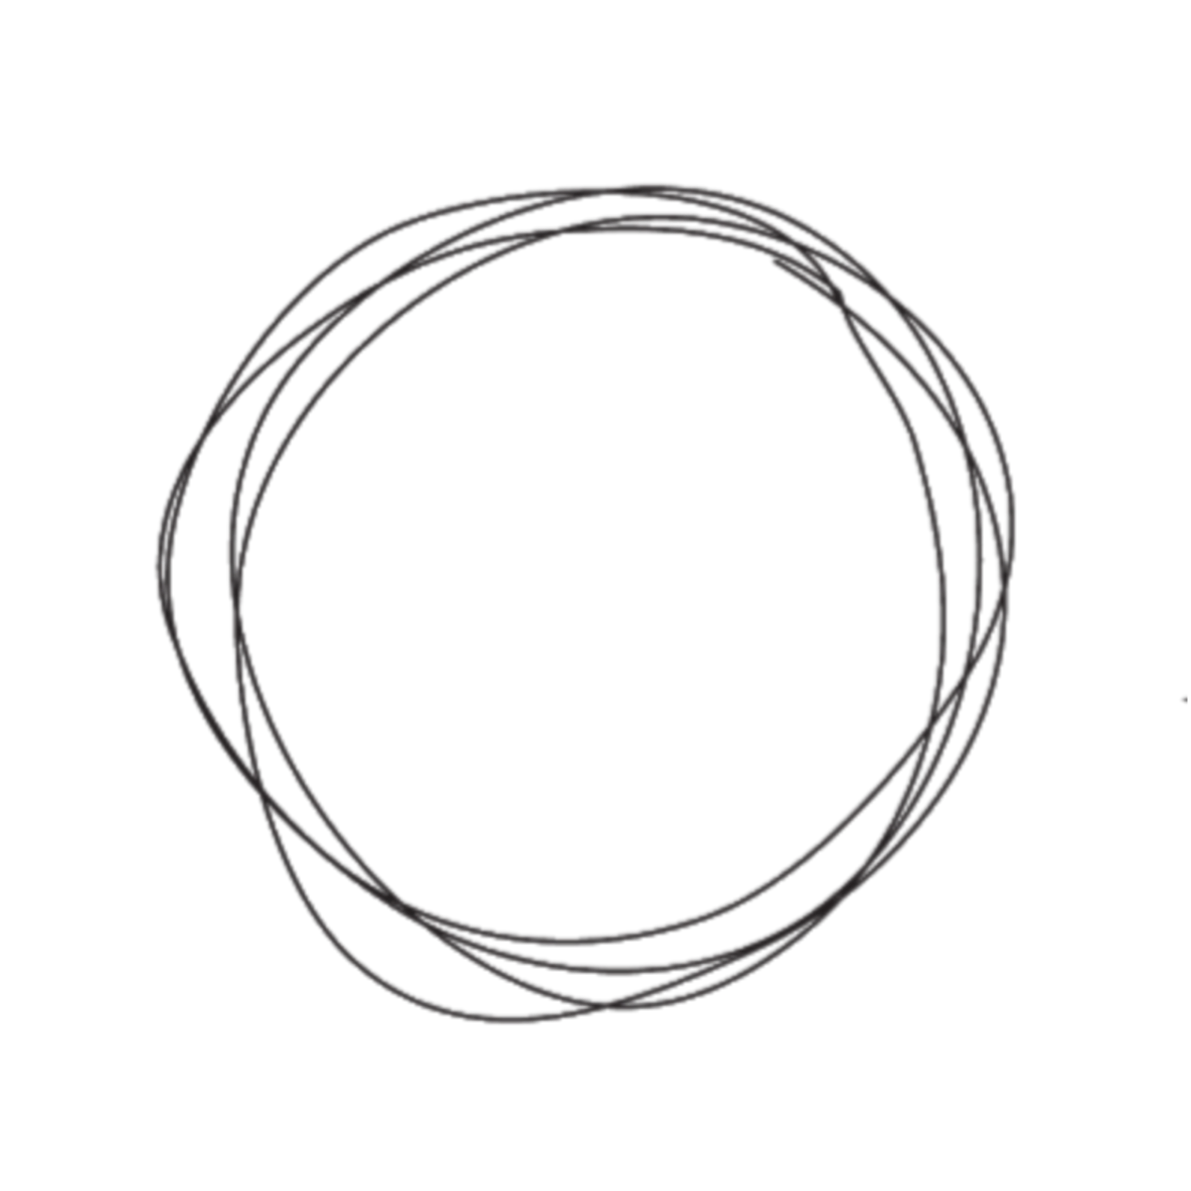 0 Result Images of Aesthetic Circle Border Png - PNG Image Collection